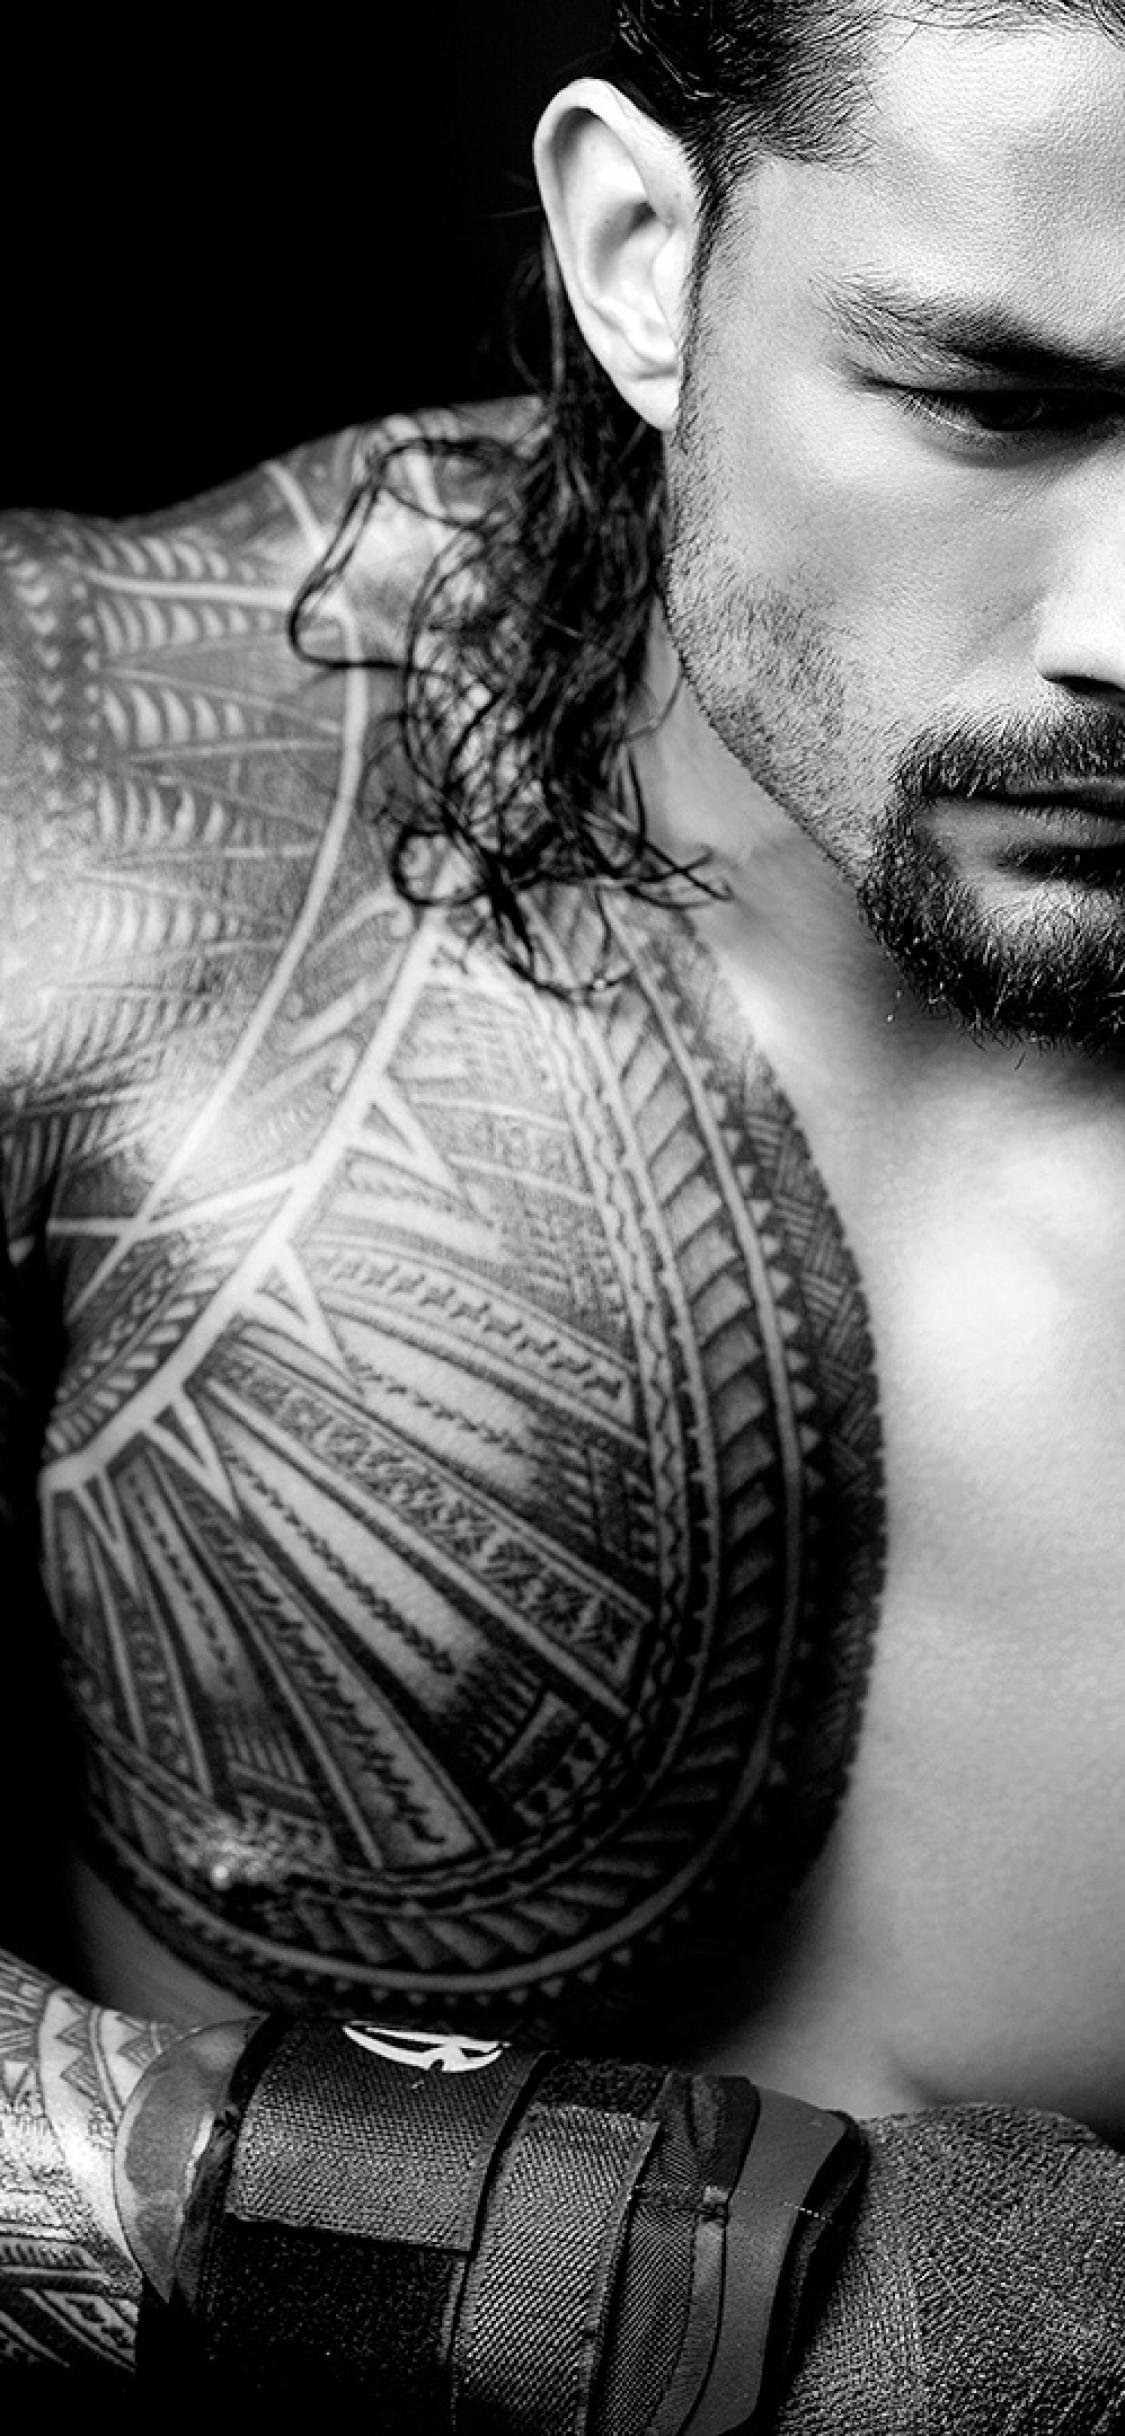 Roman reigns workout Wallpapers Download | MobCup